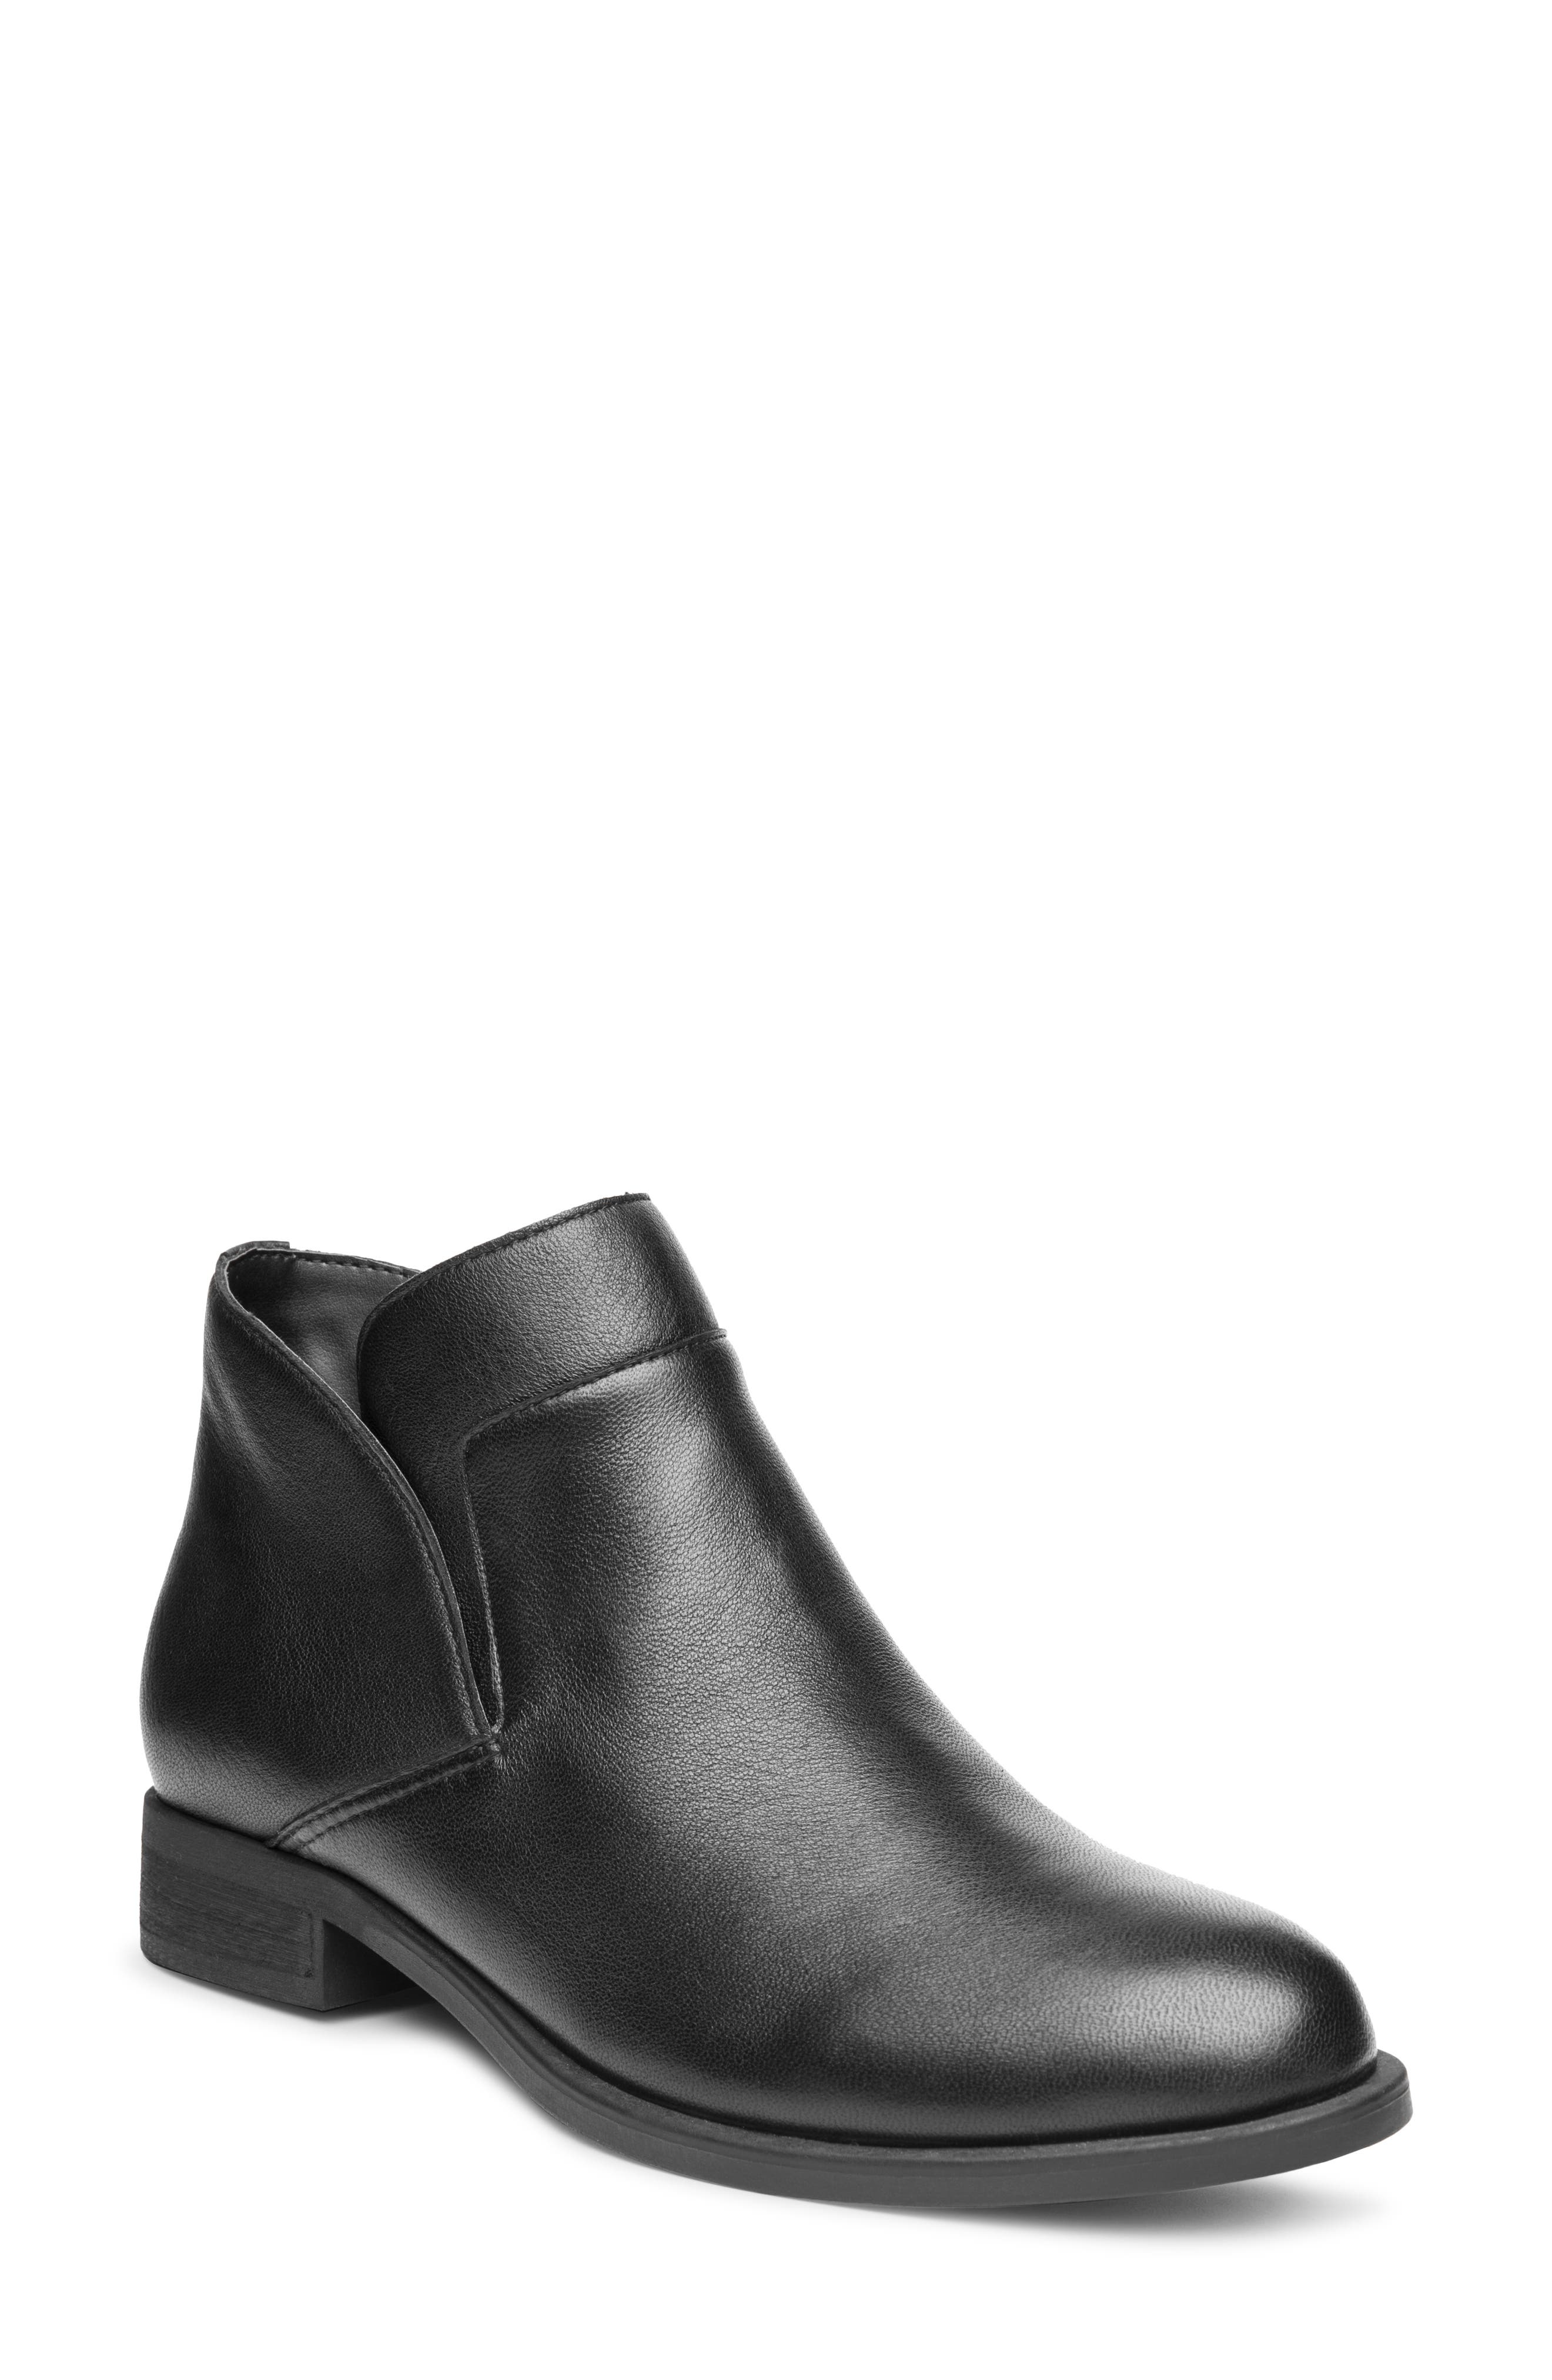 black ankle boots very